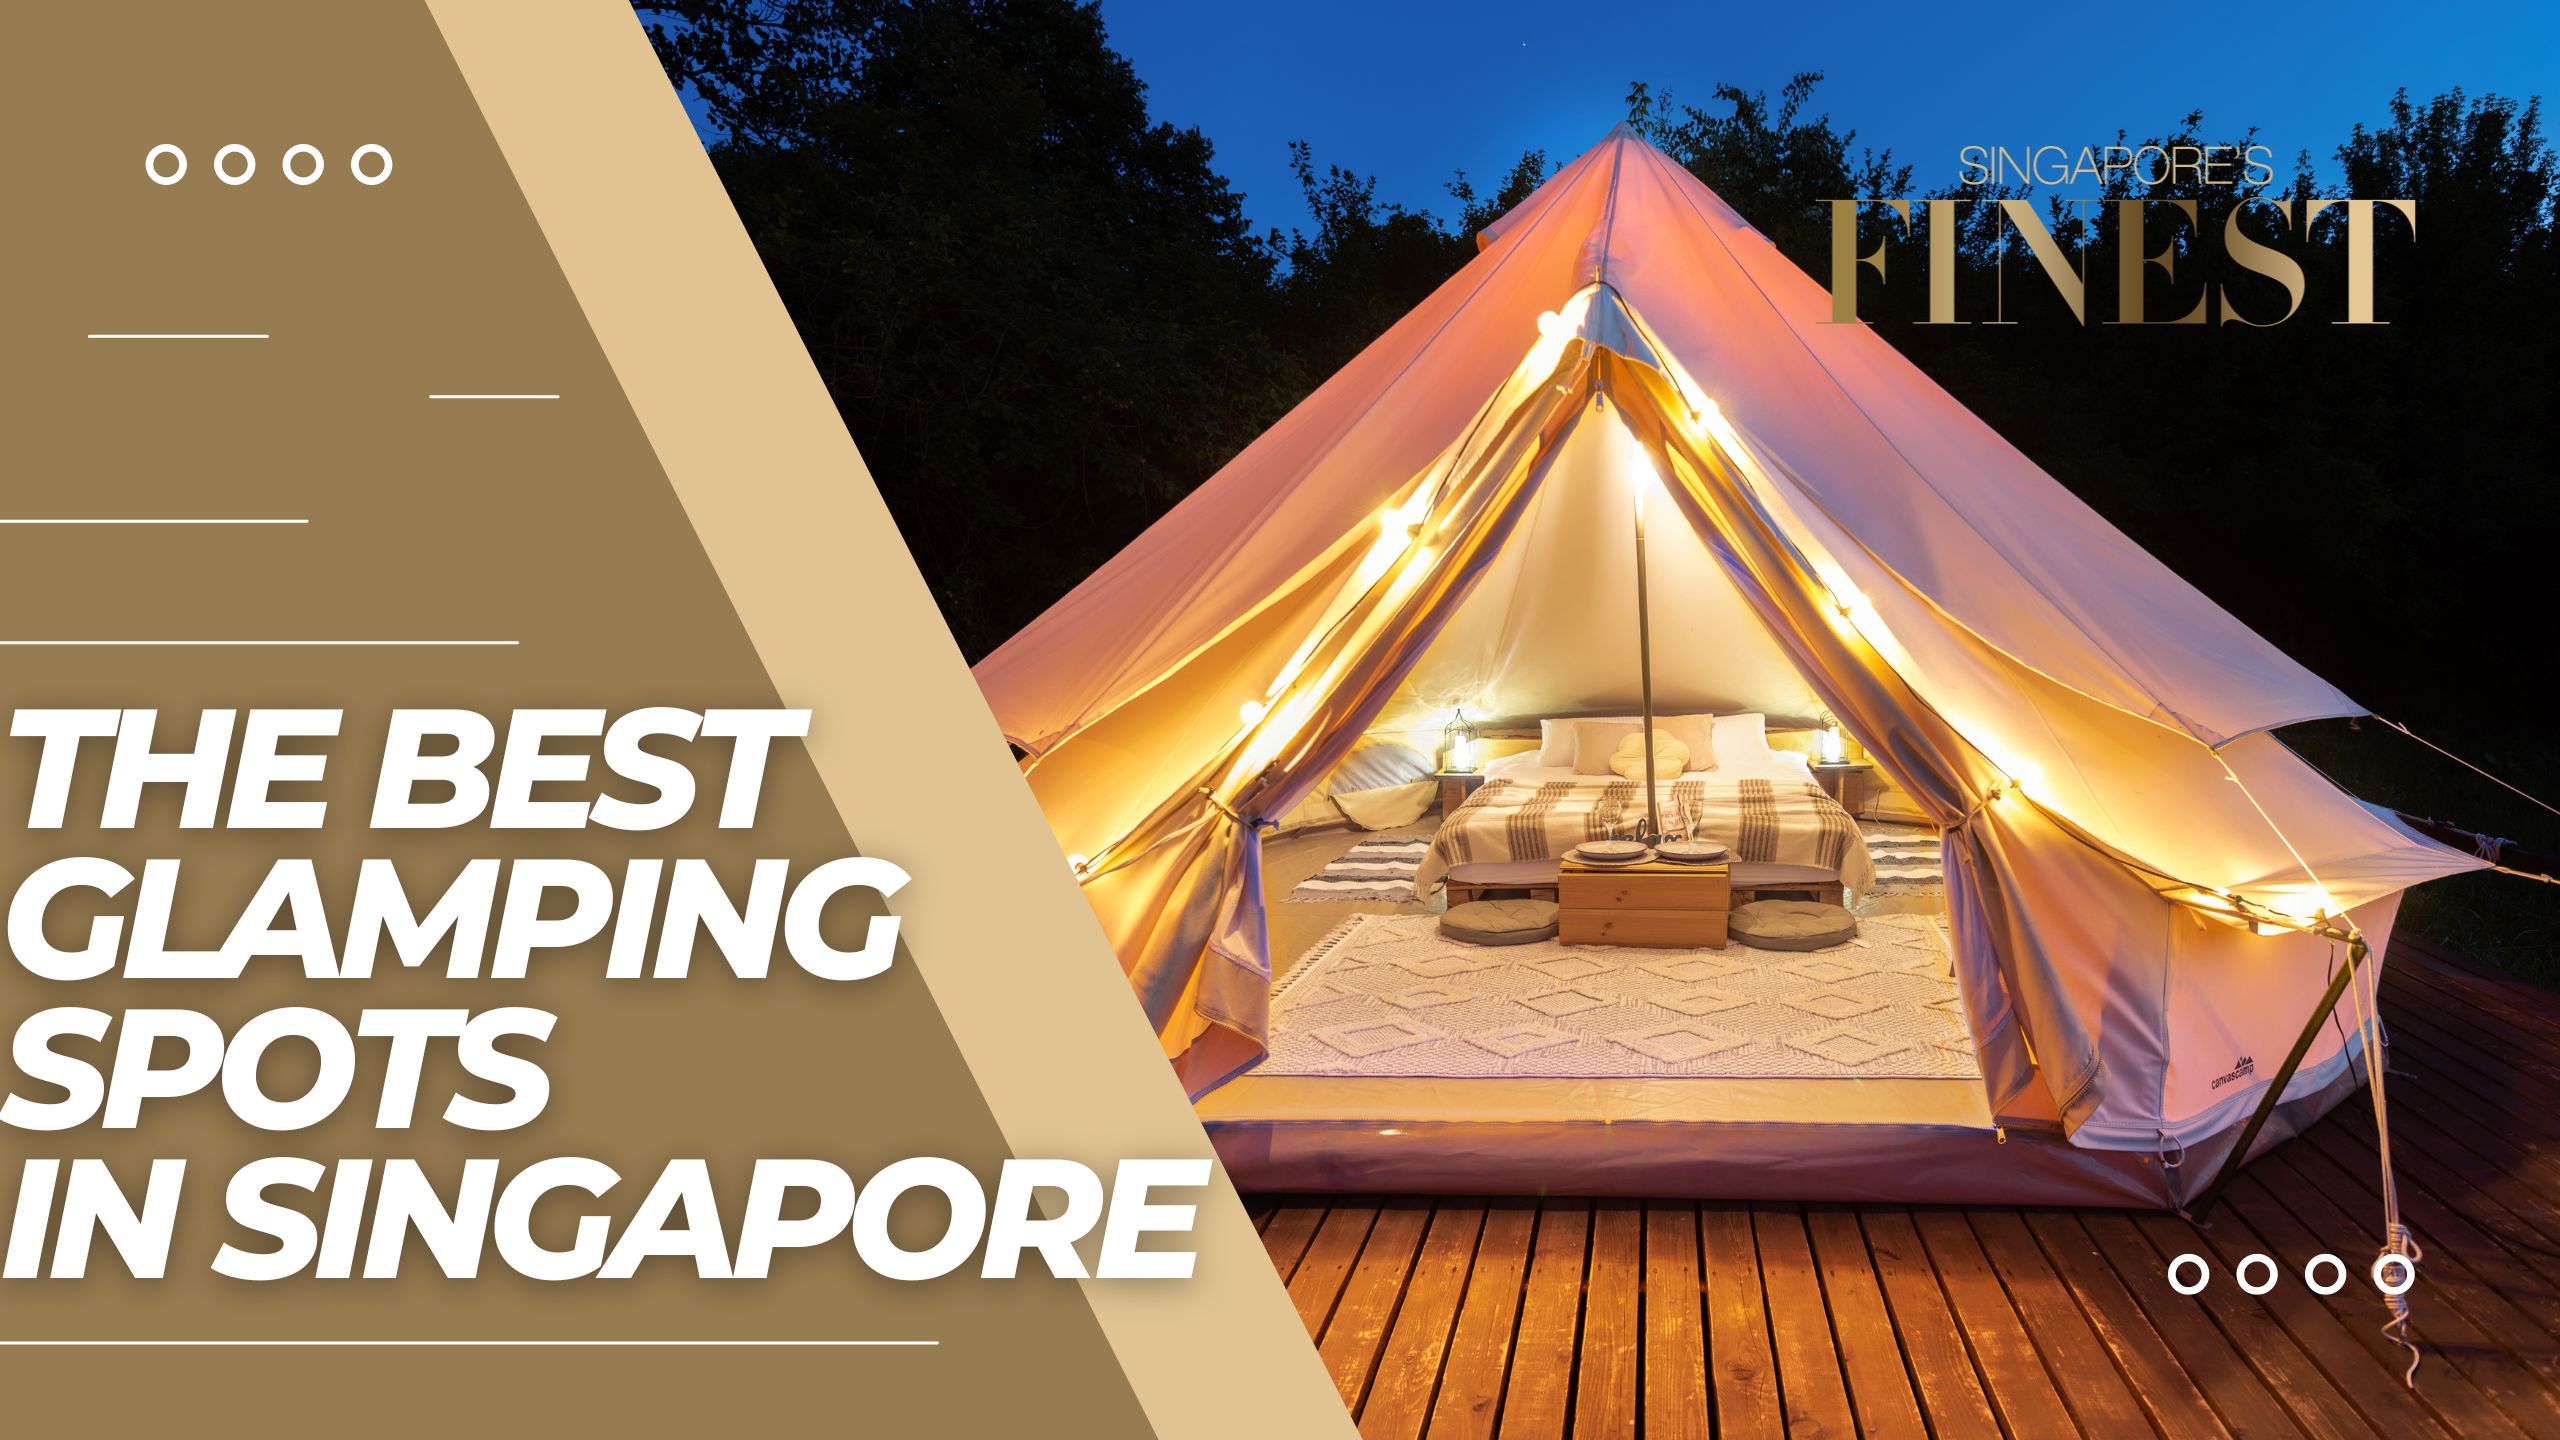 The Finest Glamping Spots in Singapore